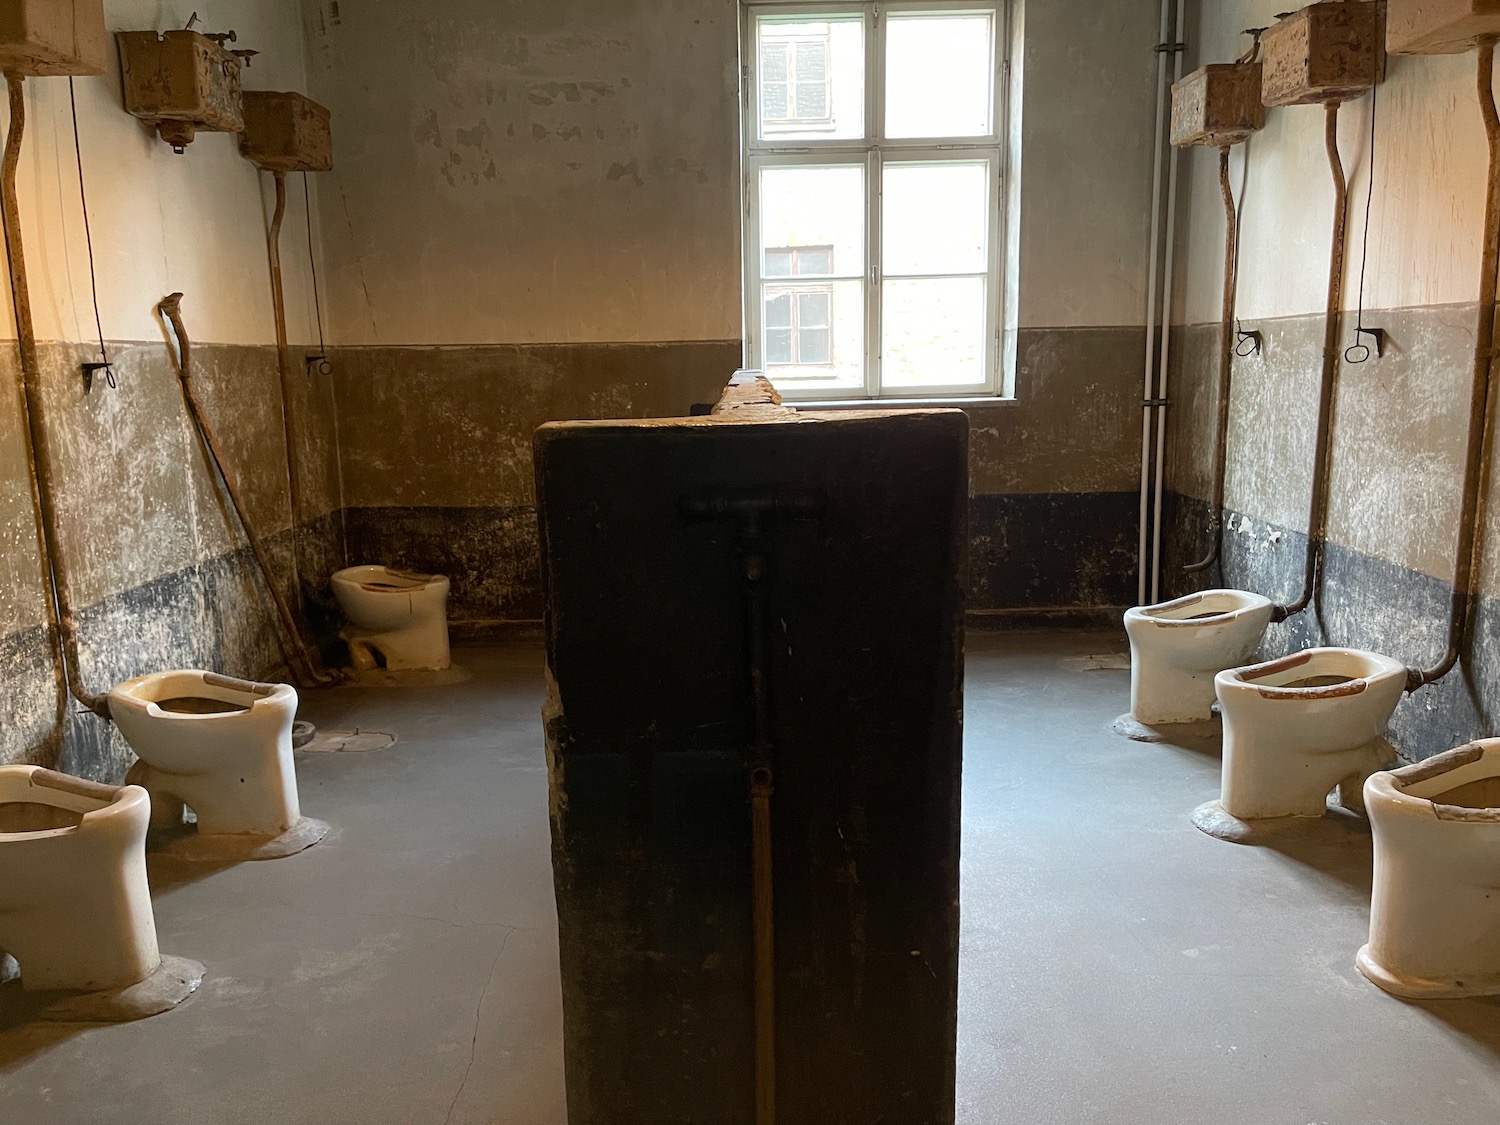 a room with toilets and a rectangular object